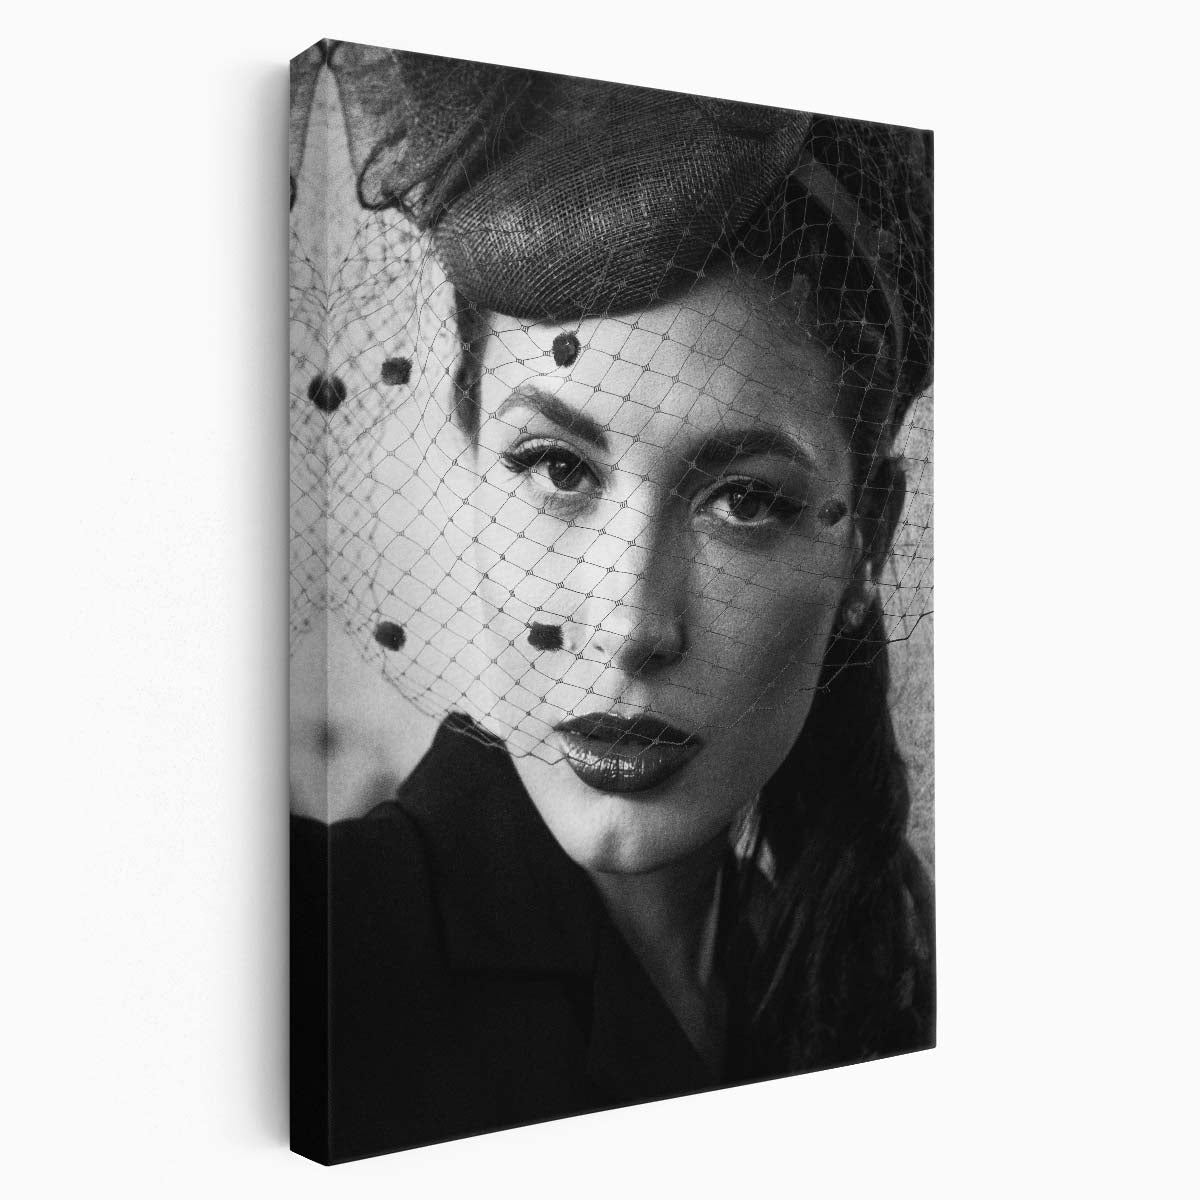 Elegant Vintage Woman Portrait in Monochrome - Nostalgic Figurative Photography by Luxuriance Designs, made in USA